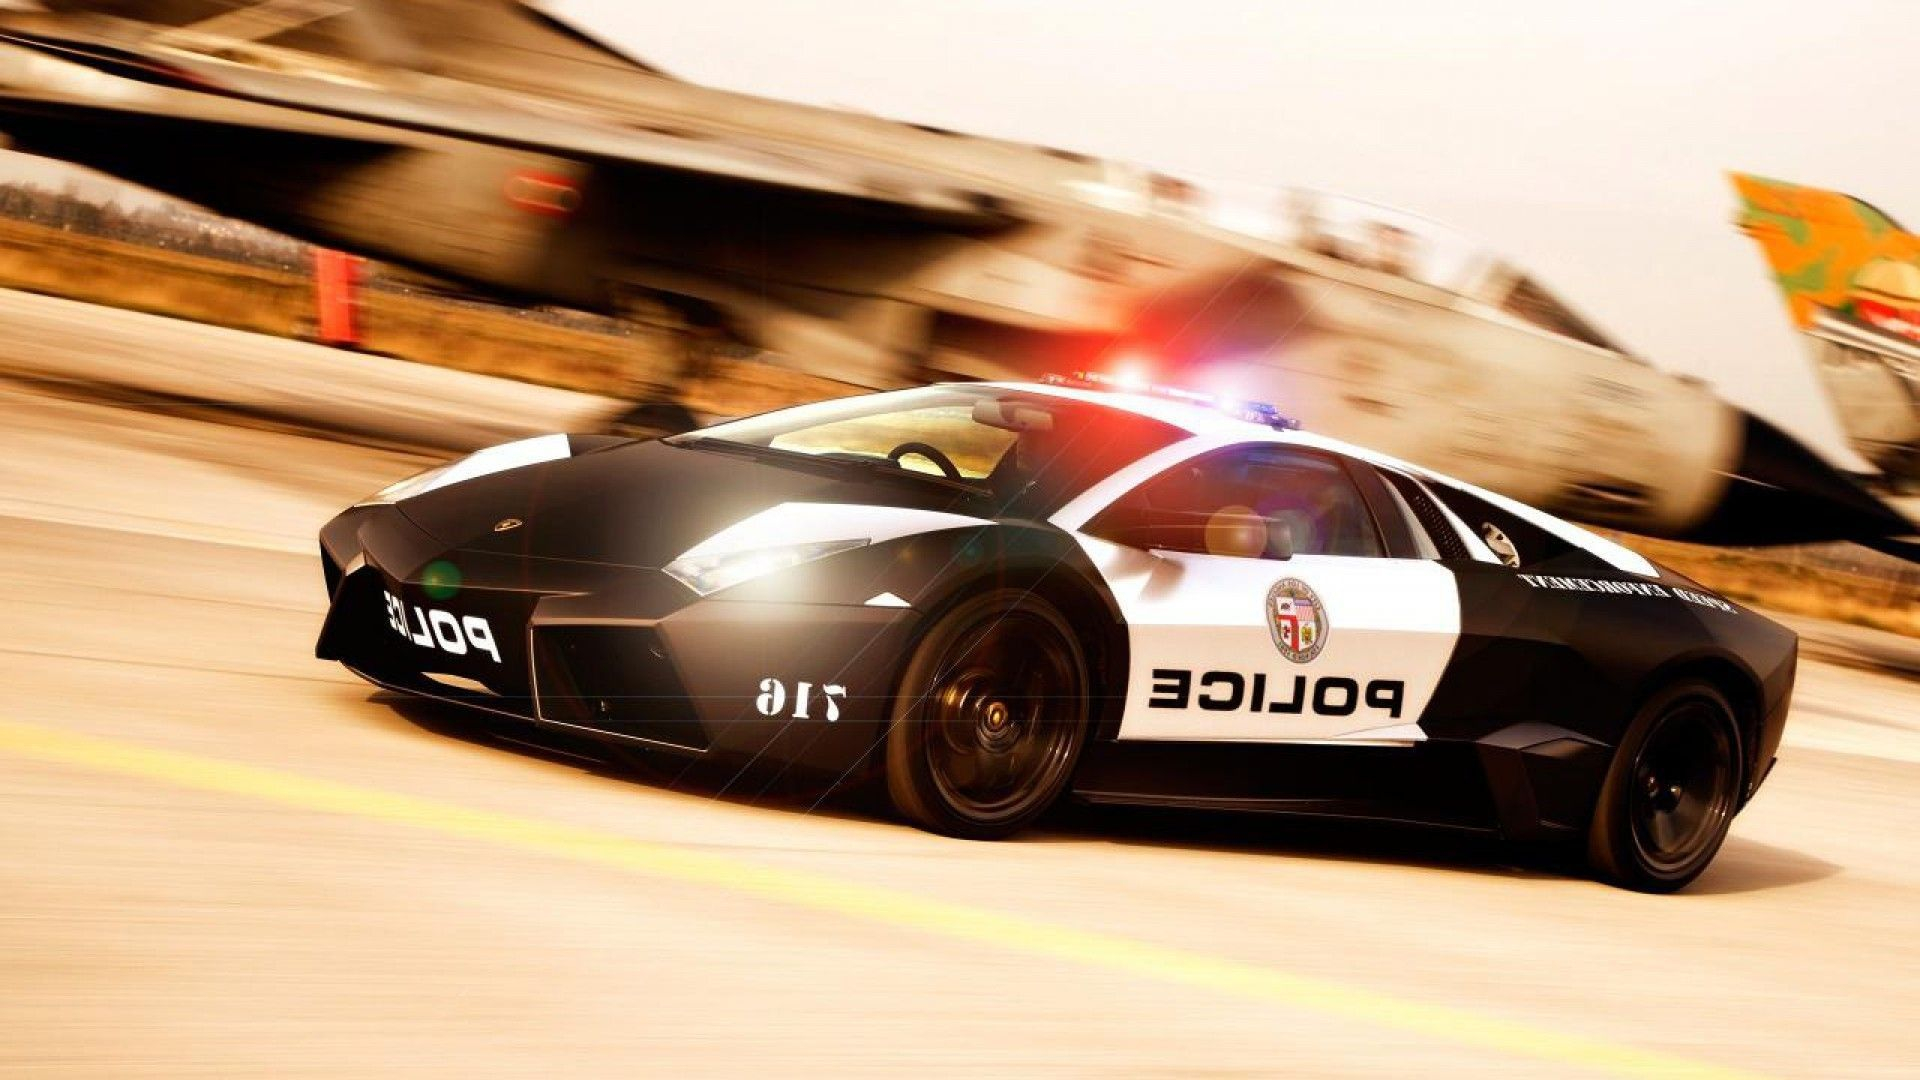 1920x1080 Lovely Police Car Wallpaper | Police cars, Police, Car wallpapers